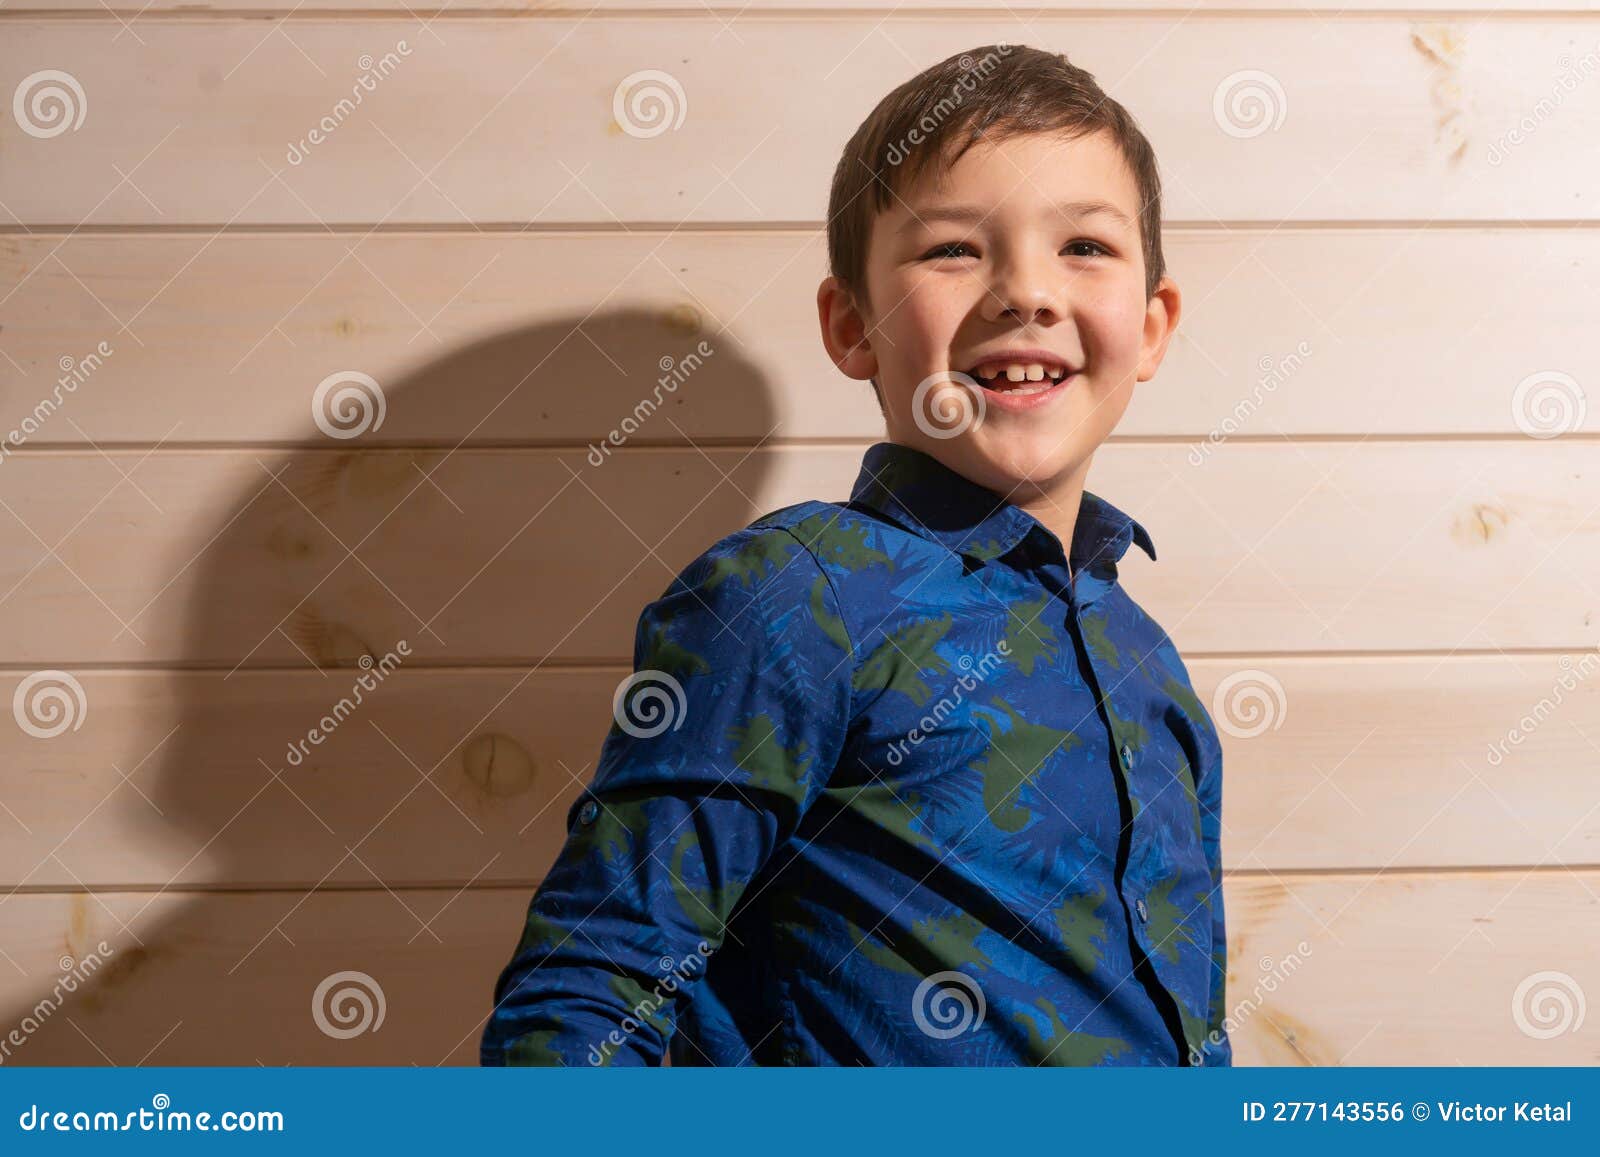 Premium Photo | A little 8 years boy with suit black eyes curly hair with  smile